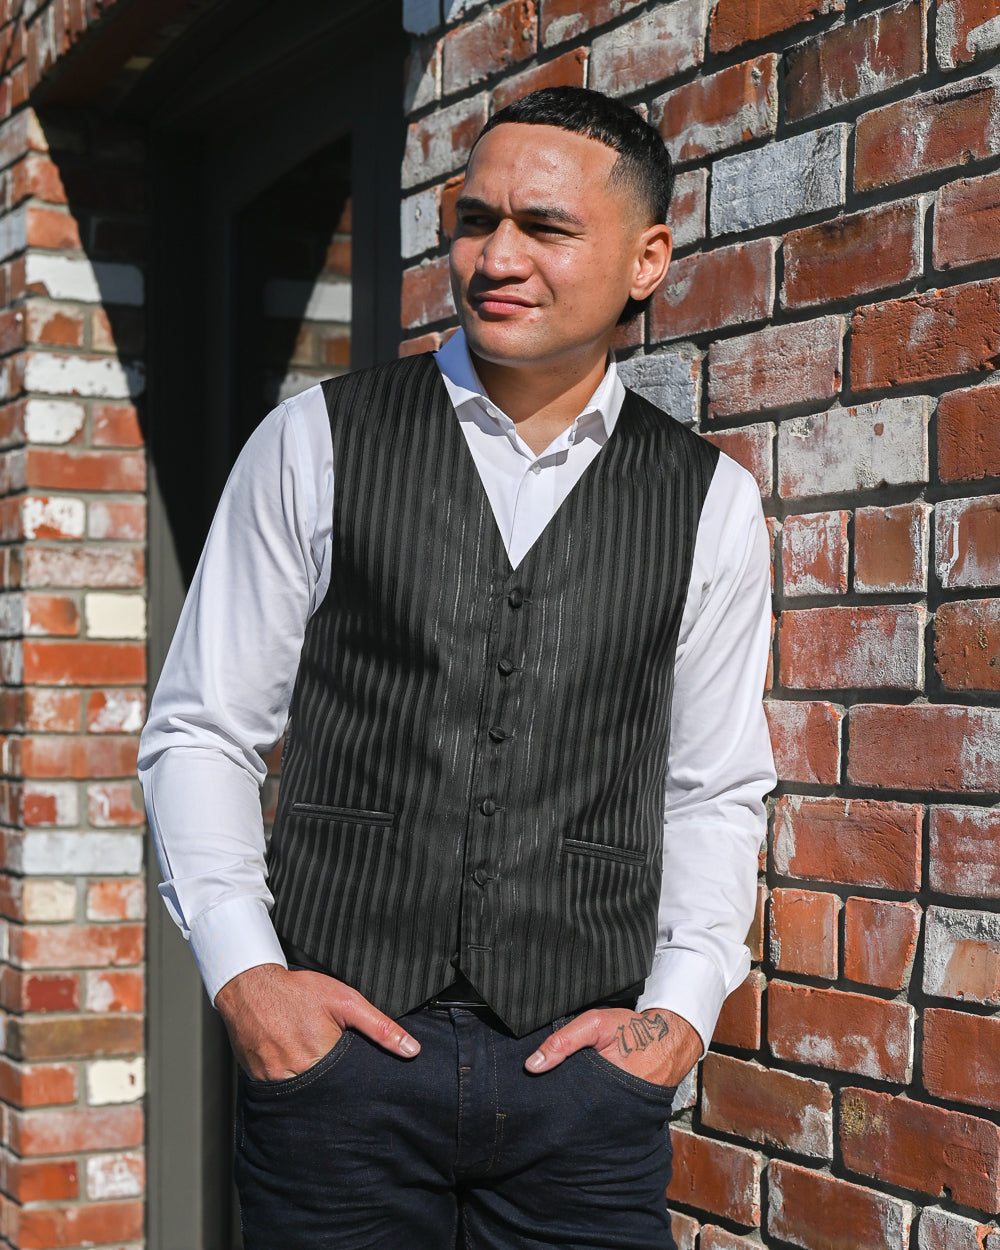 Handsome young man wearing a black stripe waistcoat with a white shirt